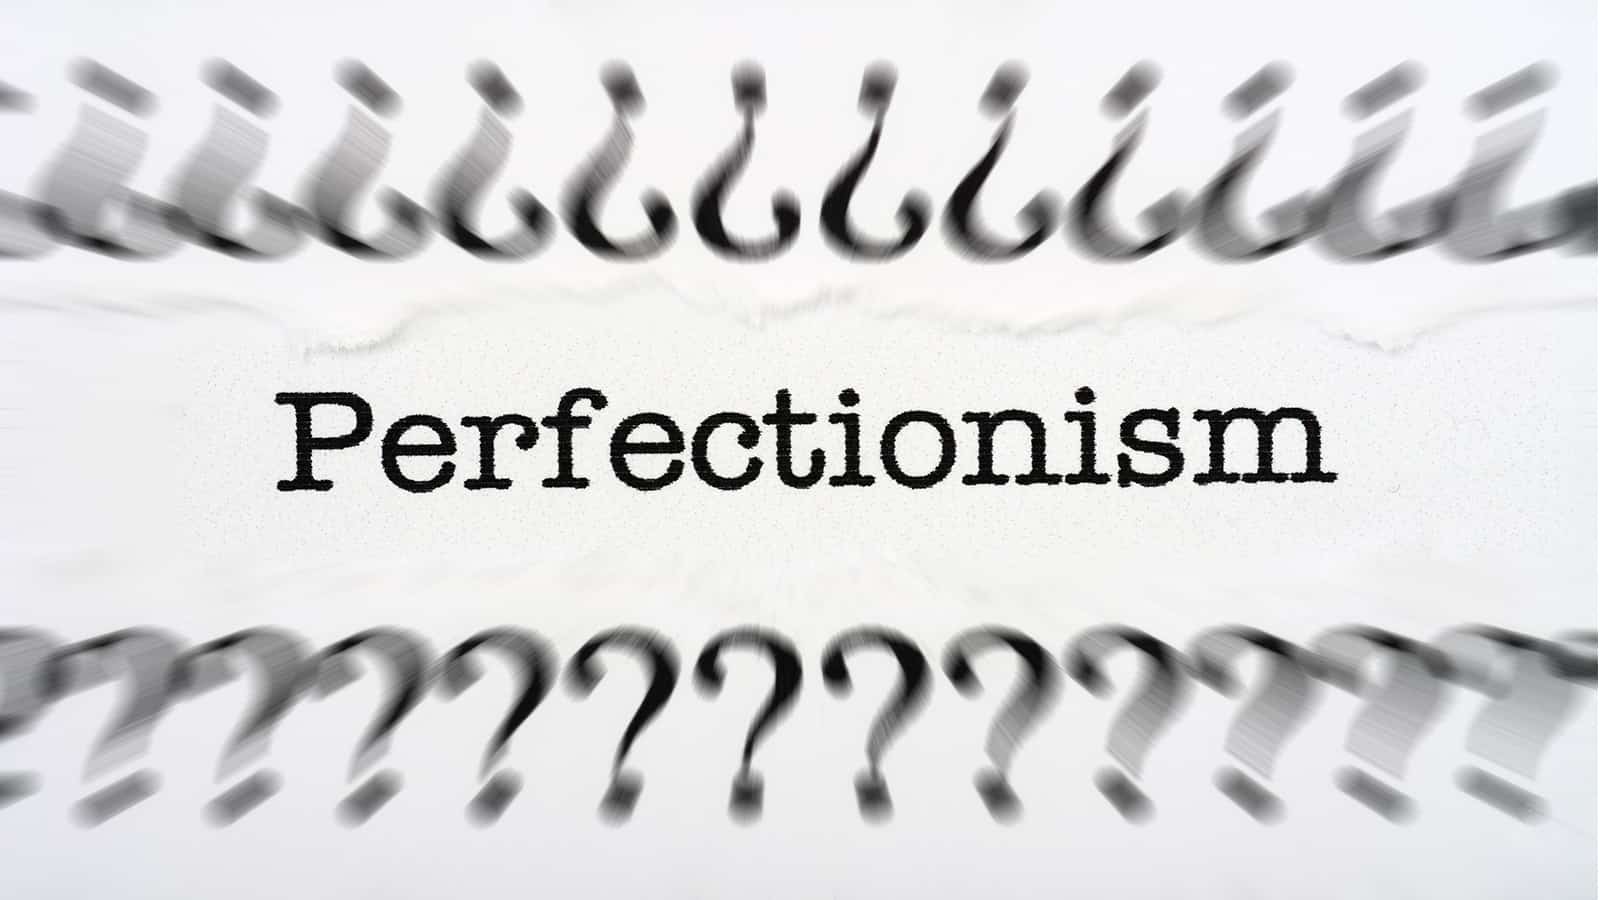 Therapists Reveal 6 Reasons Perfectionism Can Be Self-Sabotaging